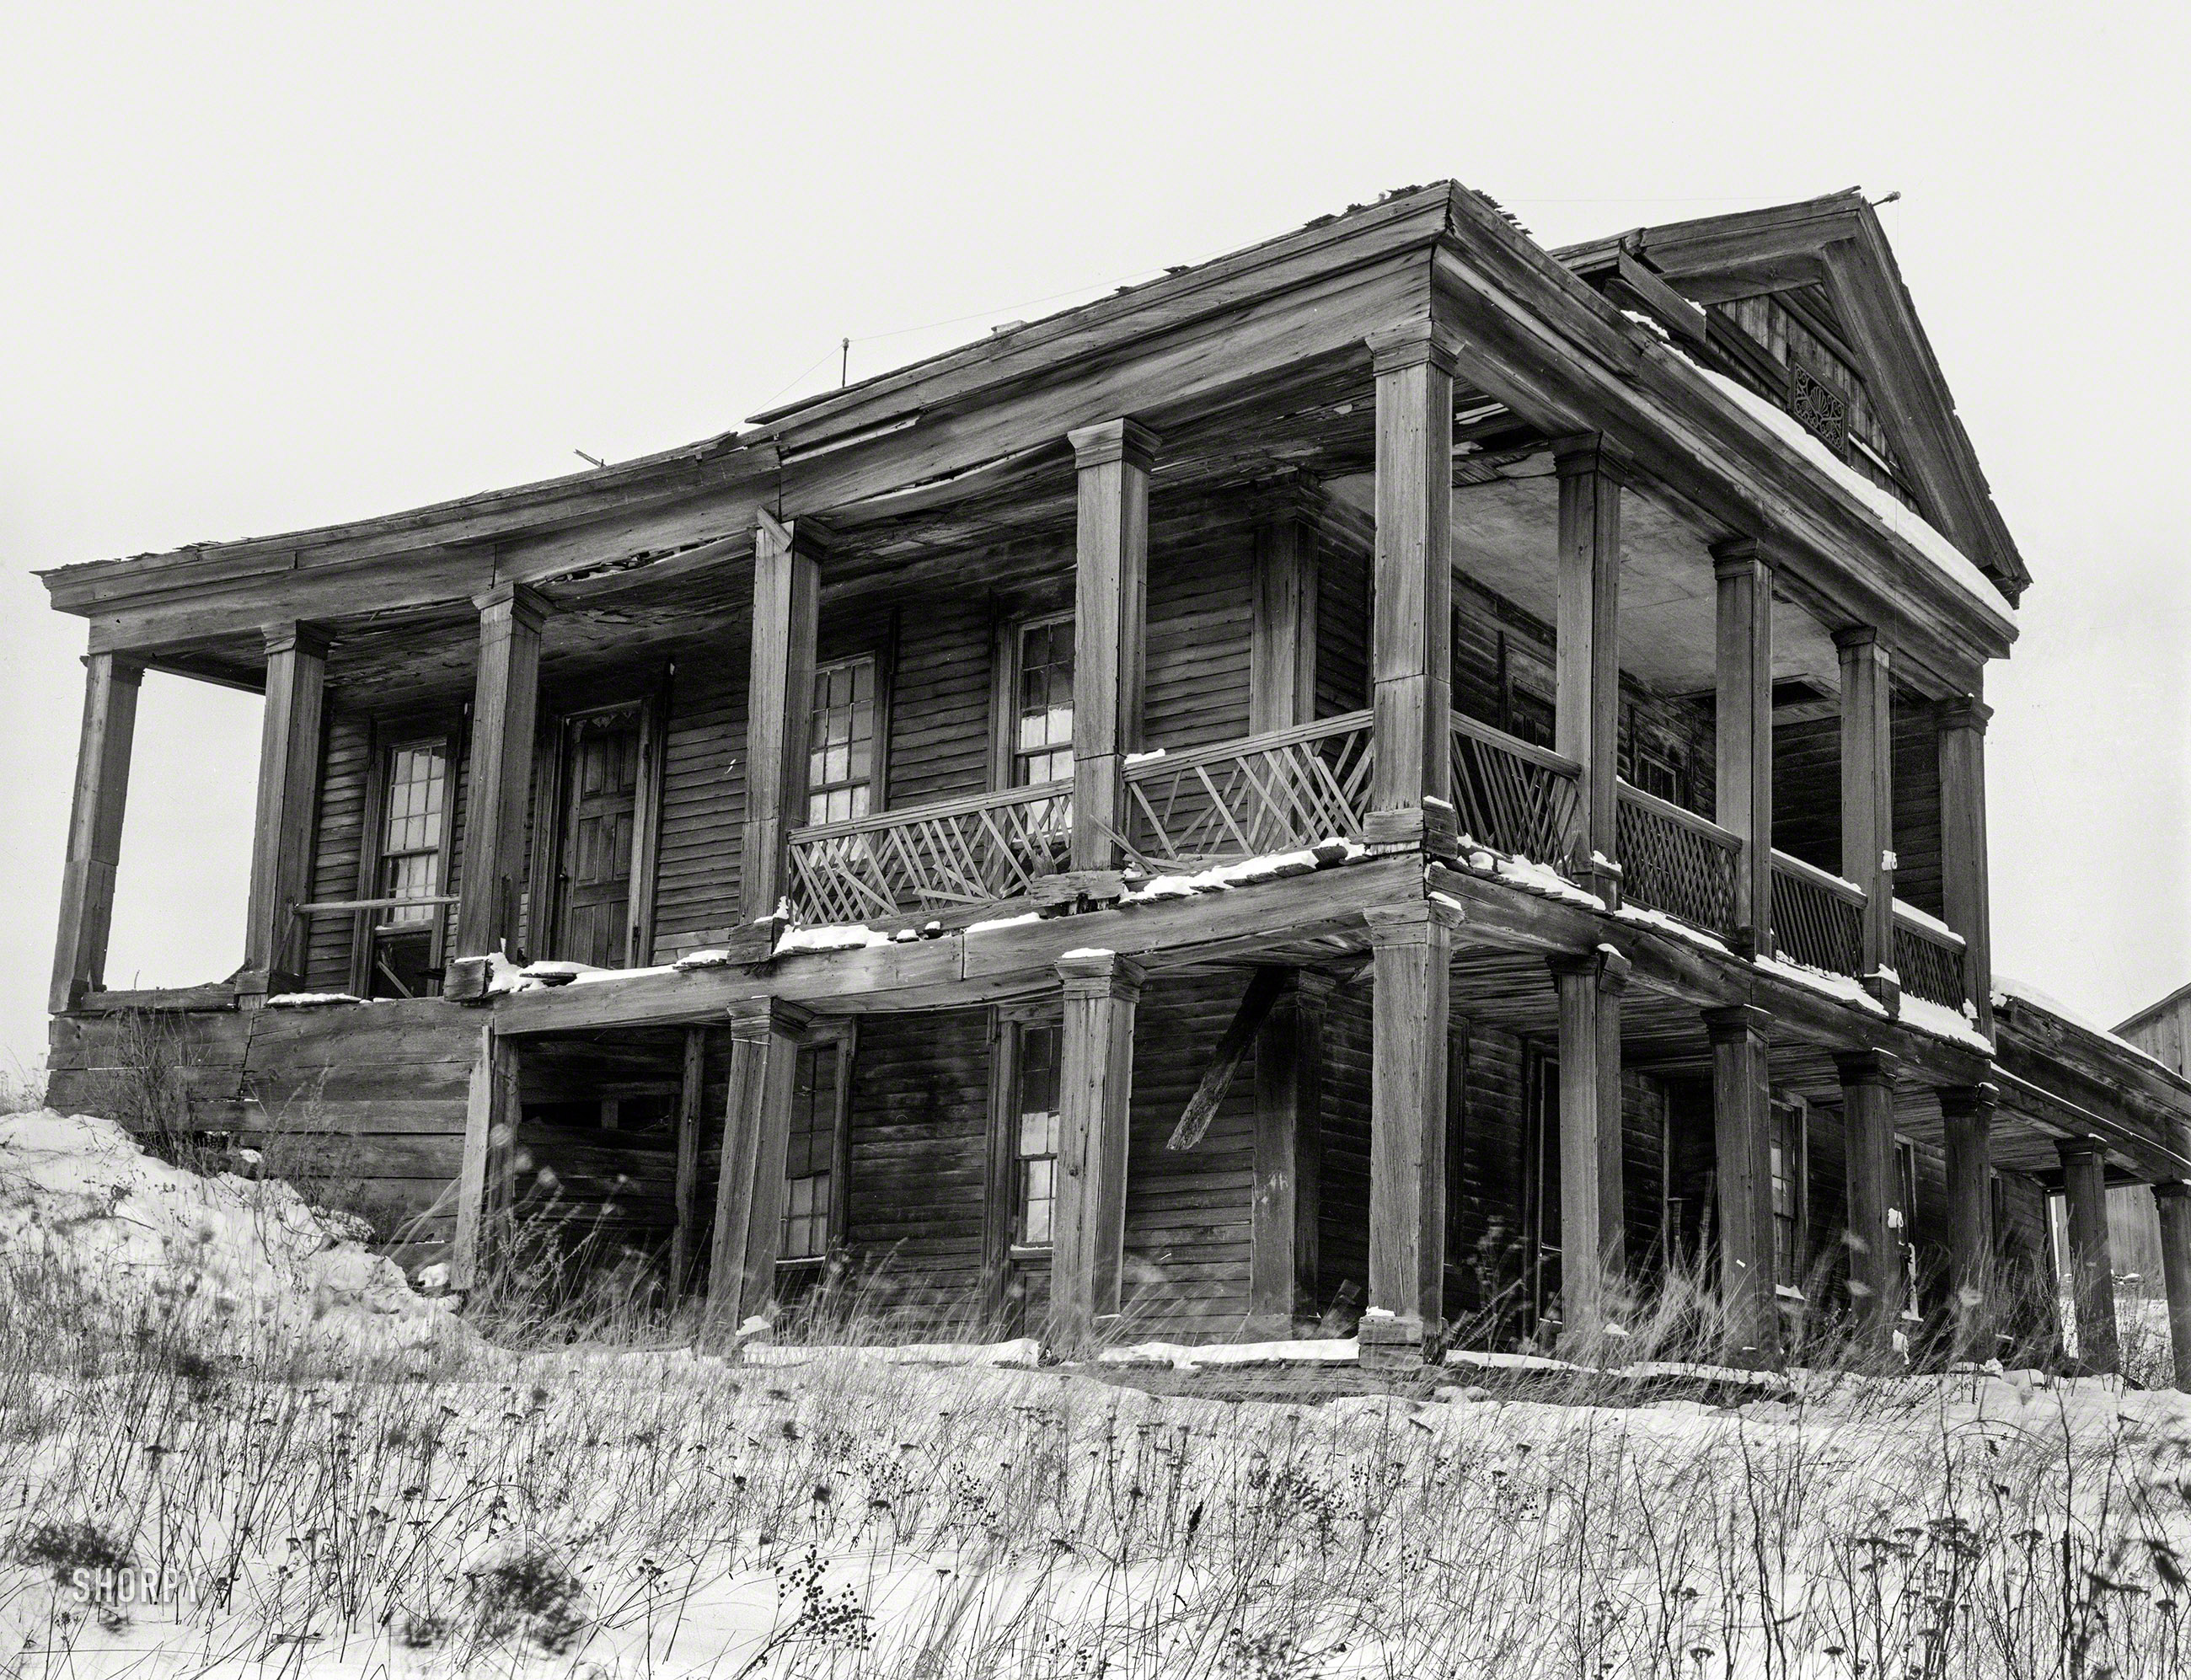 December 1937. "House in disrepair. Abandoned farm community. Dalton, Allegany County, New York." Photo by Arthur Rothstein. View full size.